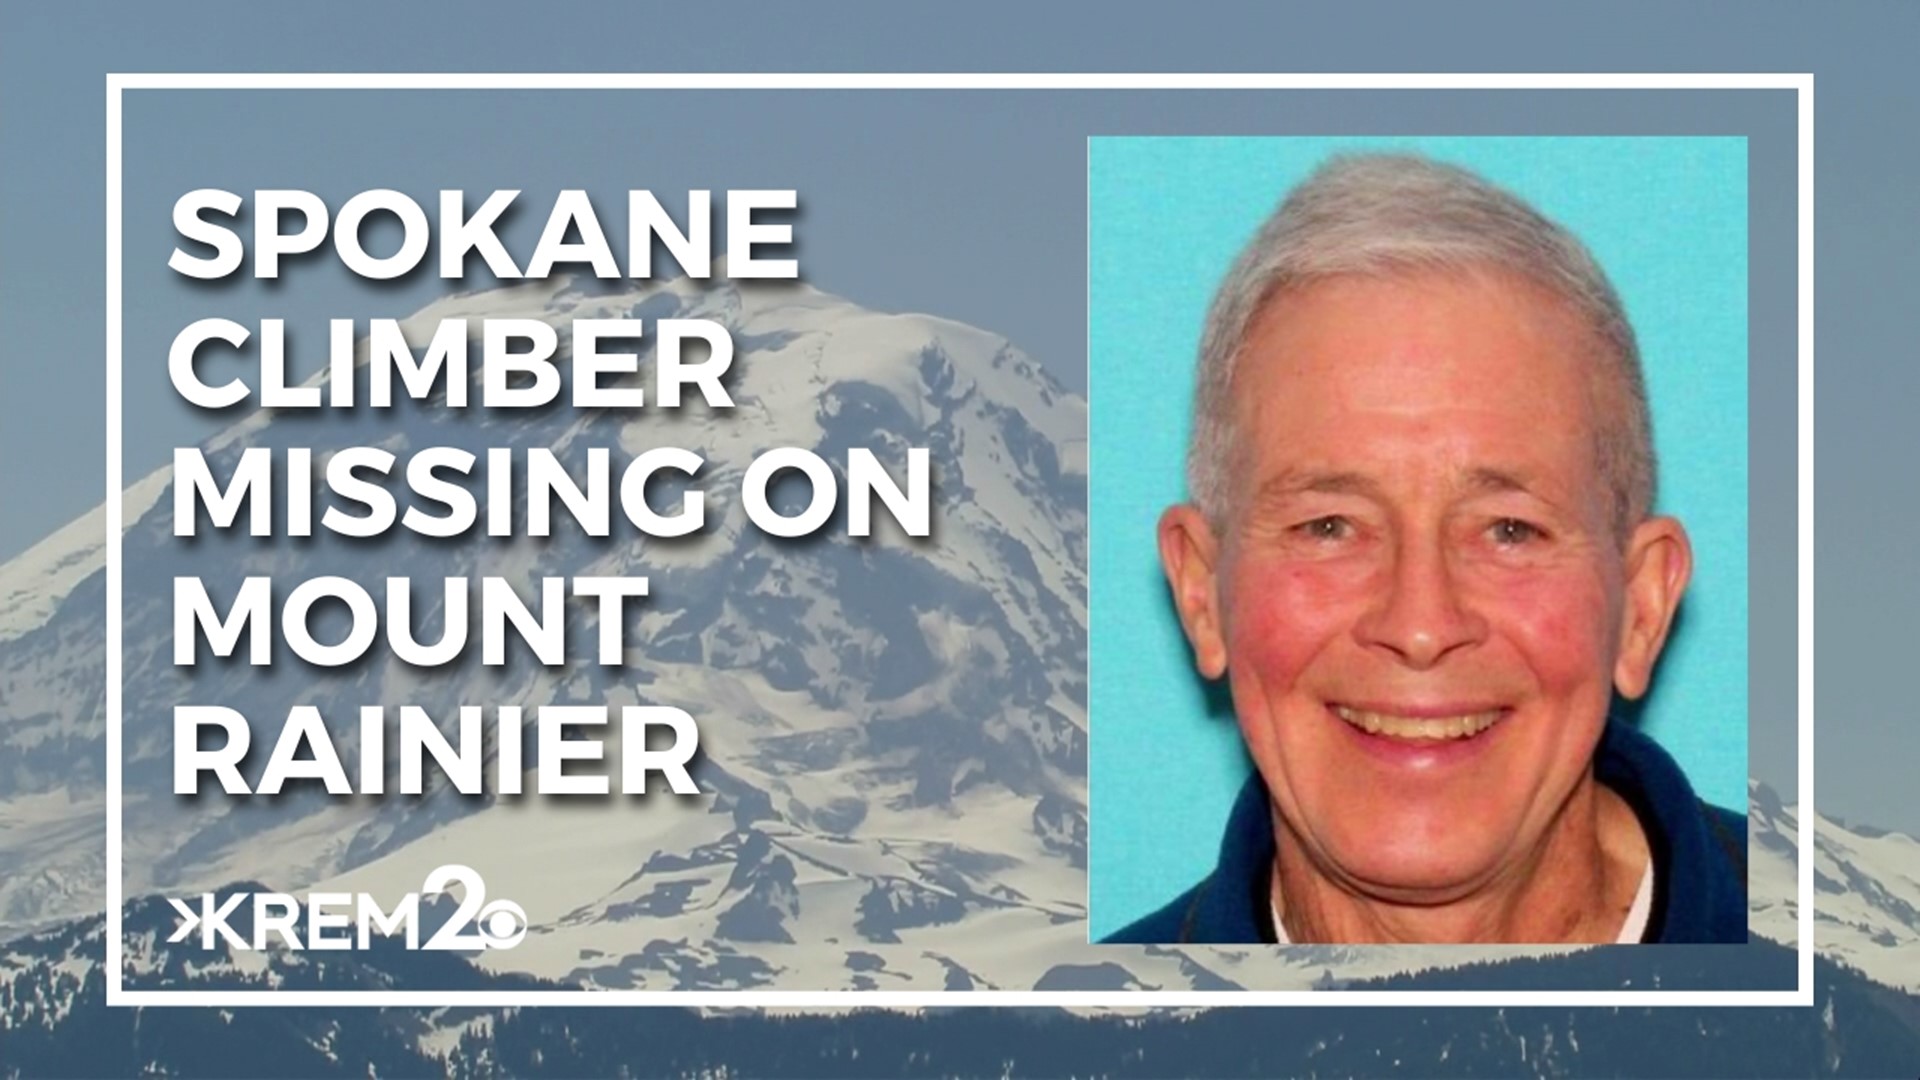 Tuesday a body matching the description of the missing Mt. Rainier climber was found.